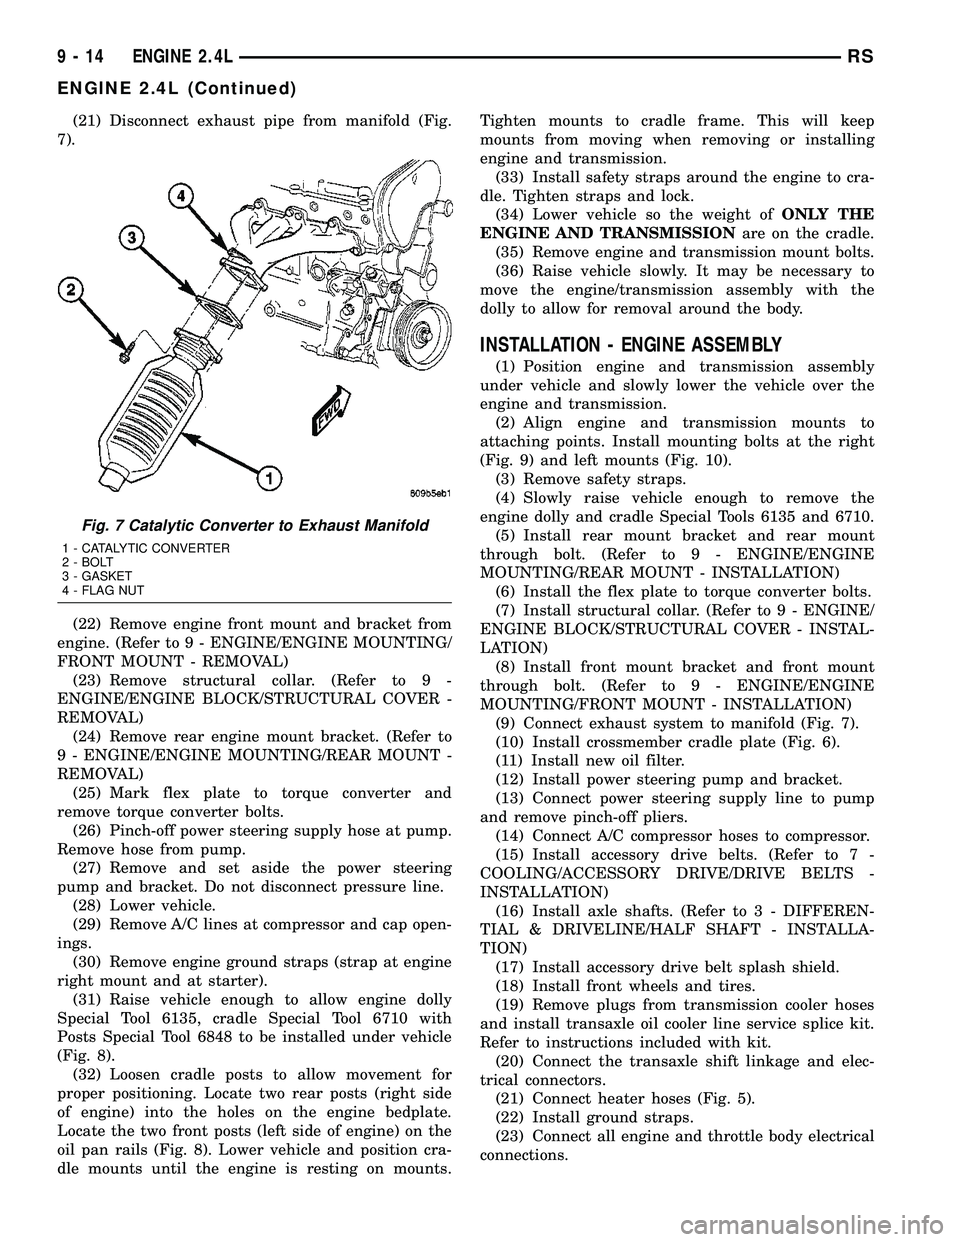 CHRYSLER VOYAGER 2005  Service Manual (21) Disconnect exhaust pipe from manifold (Fig.
7).
(22) Remove engine front mount and bracket from
engine. (Refer to 9 - ENGINE/ENGINE MOUNTING/
FRONT MOUNT - REMOVAL)
(23) Remove structural collar.